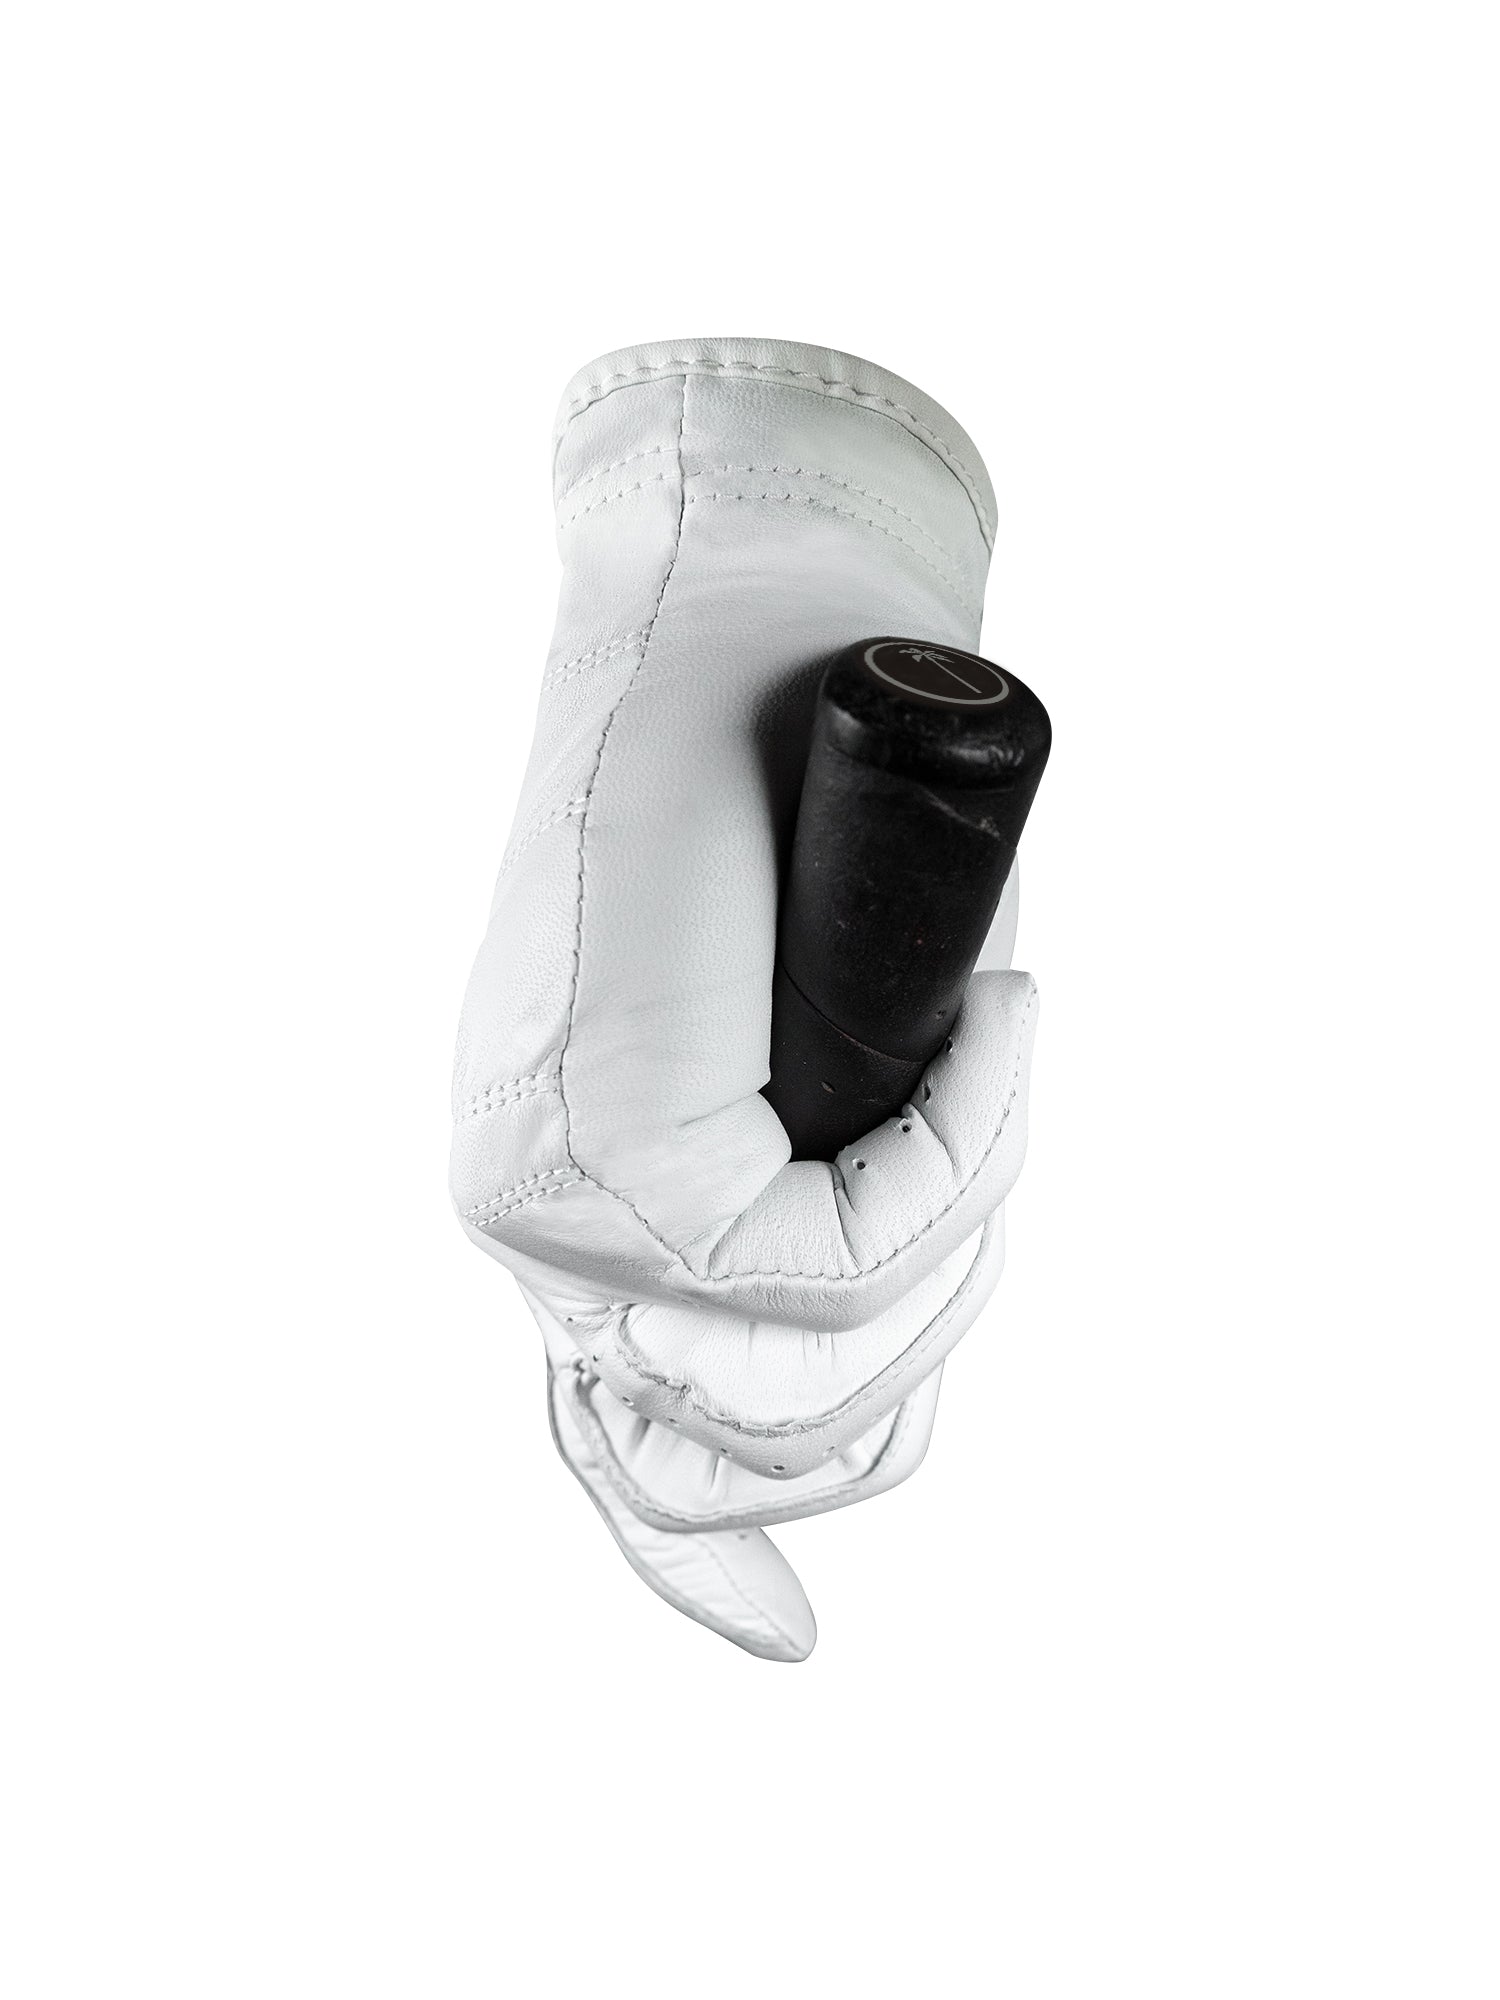 Palm Golf Co. Women's Tradition Glove